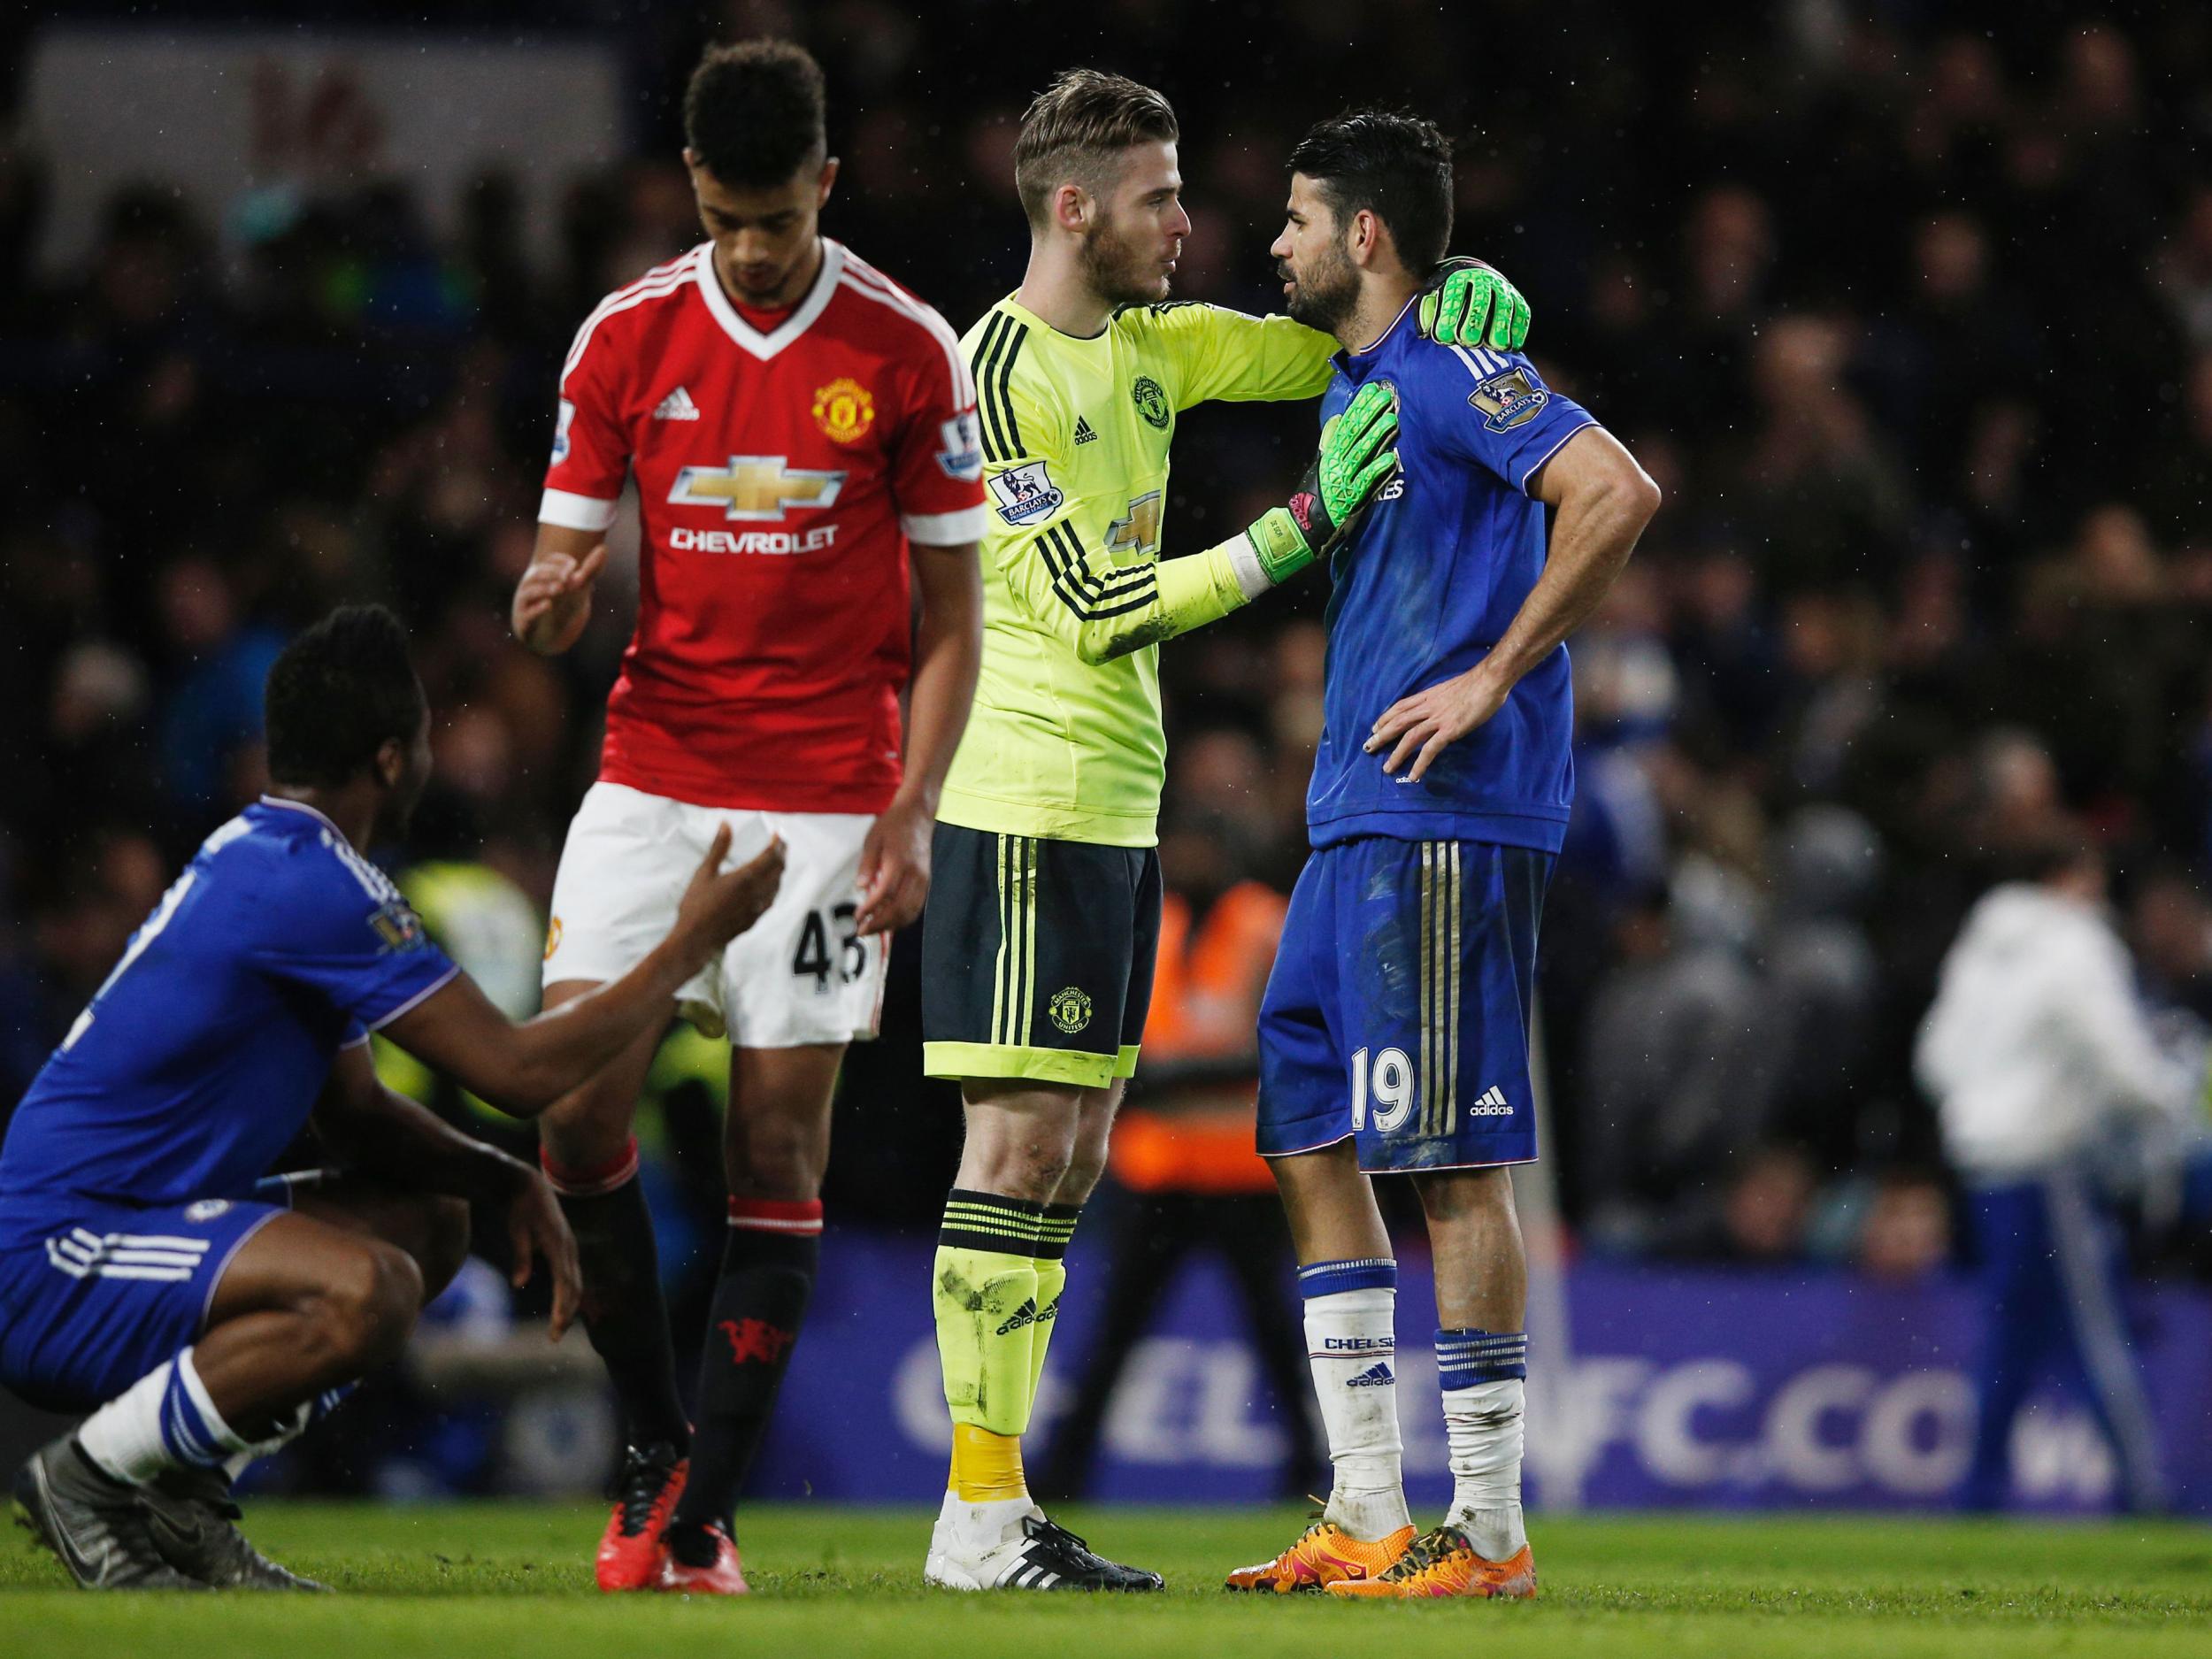 David de Gea speaks with Diego Costa after the 1-1 draw with Chelsea